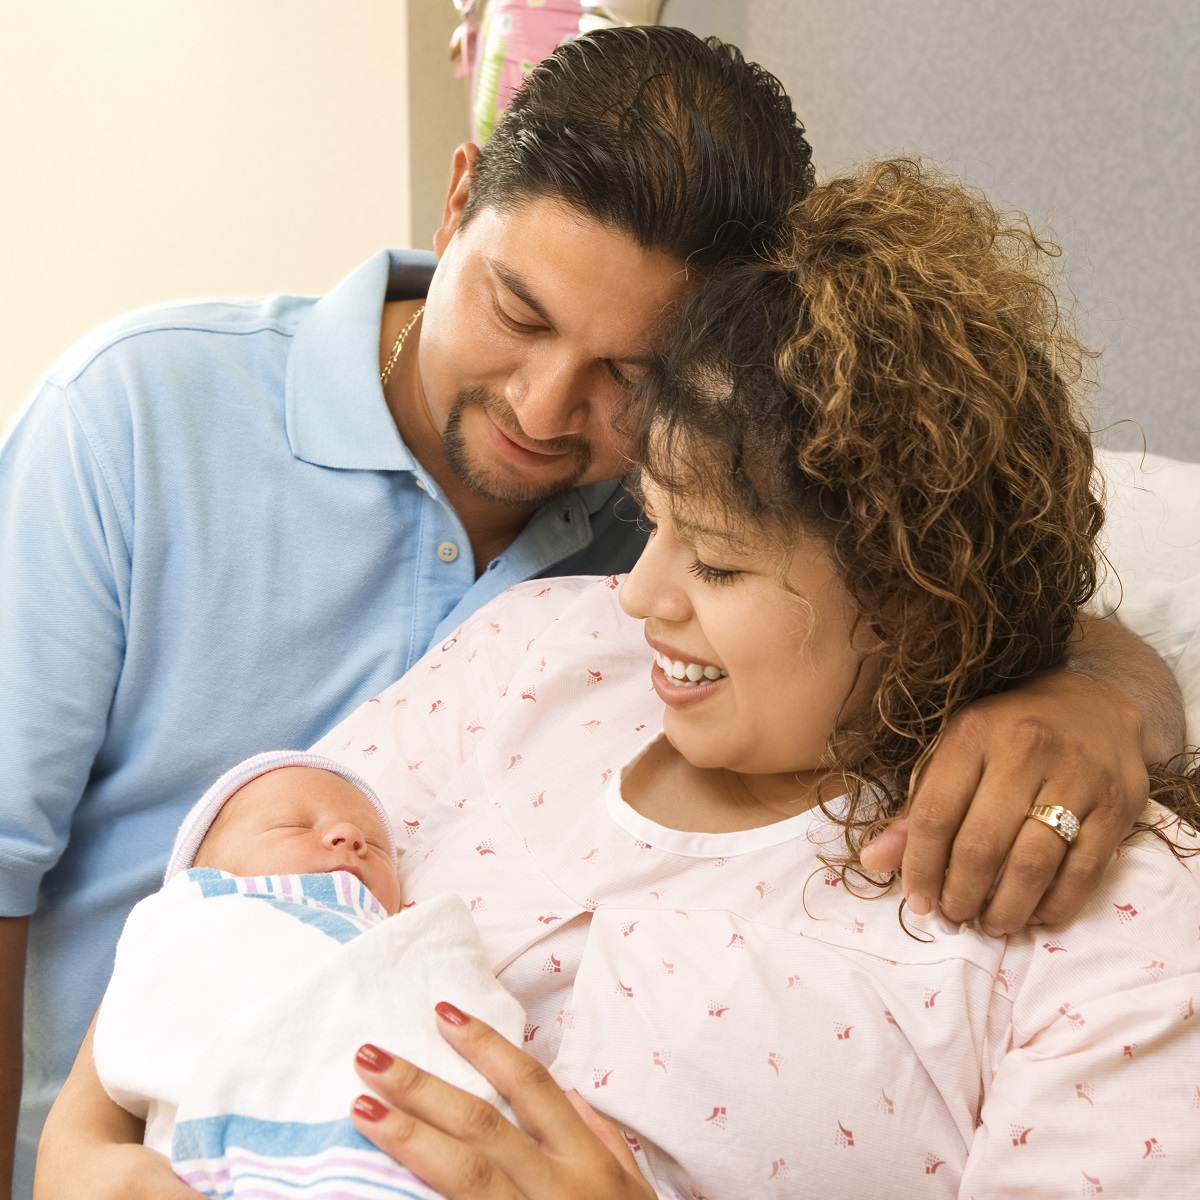 New parents with baby in hospital